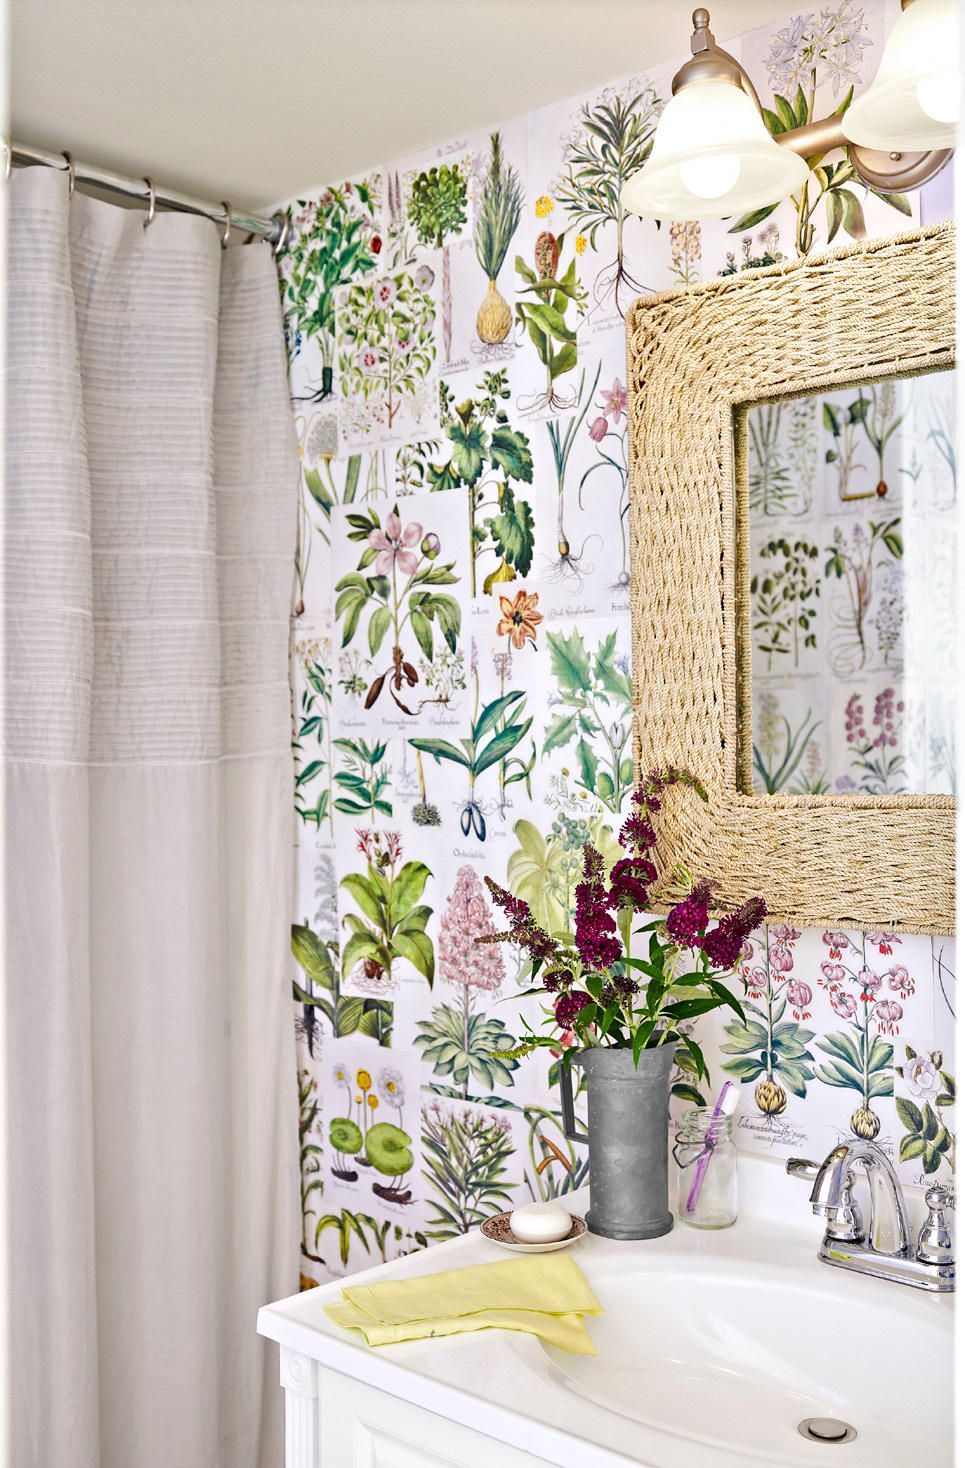 Details about   Happy New Year Wood Decor Green Leaves Twigs Shower Curtain Set Bathroom Decor 